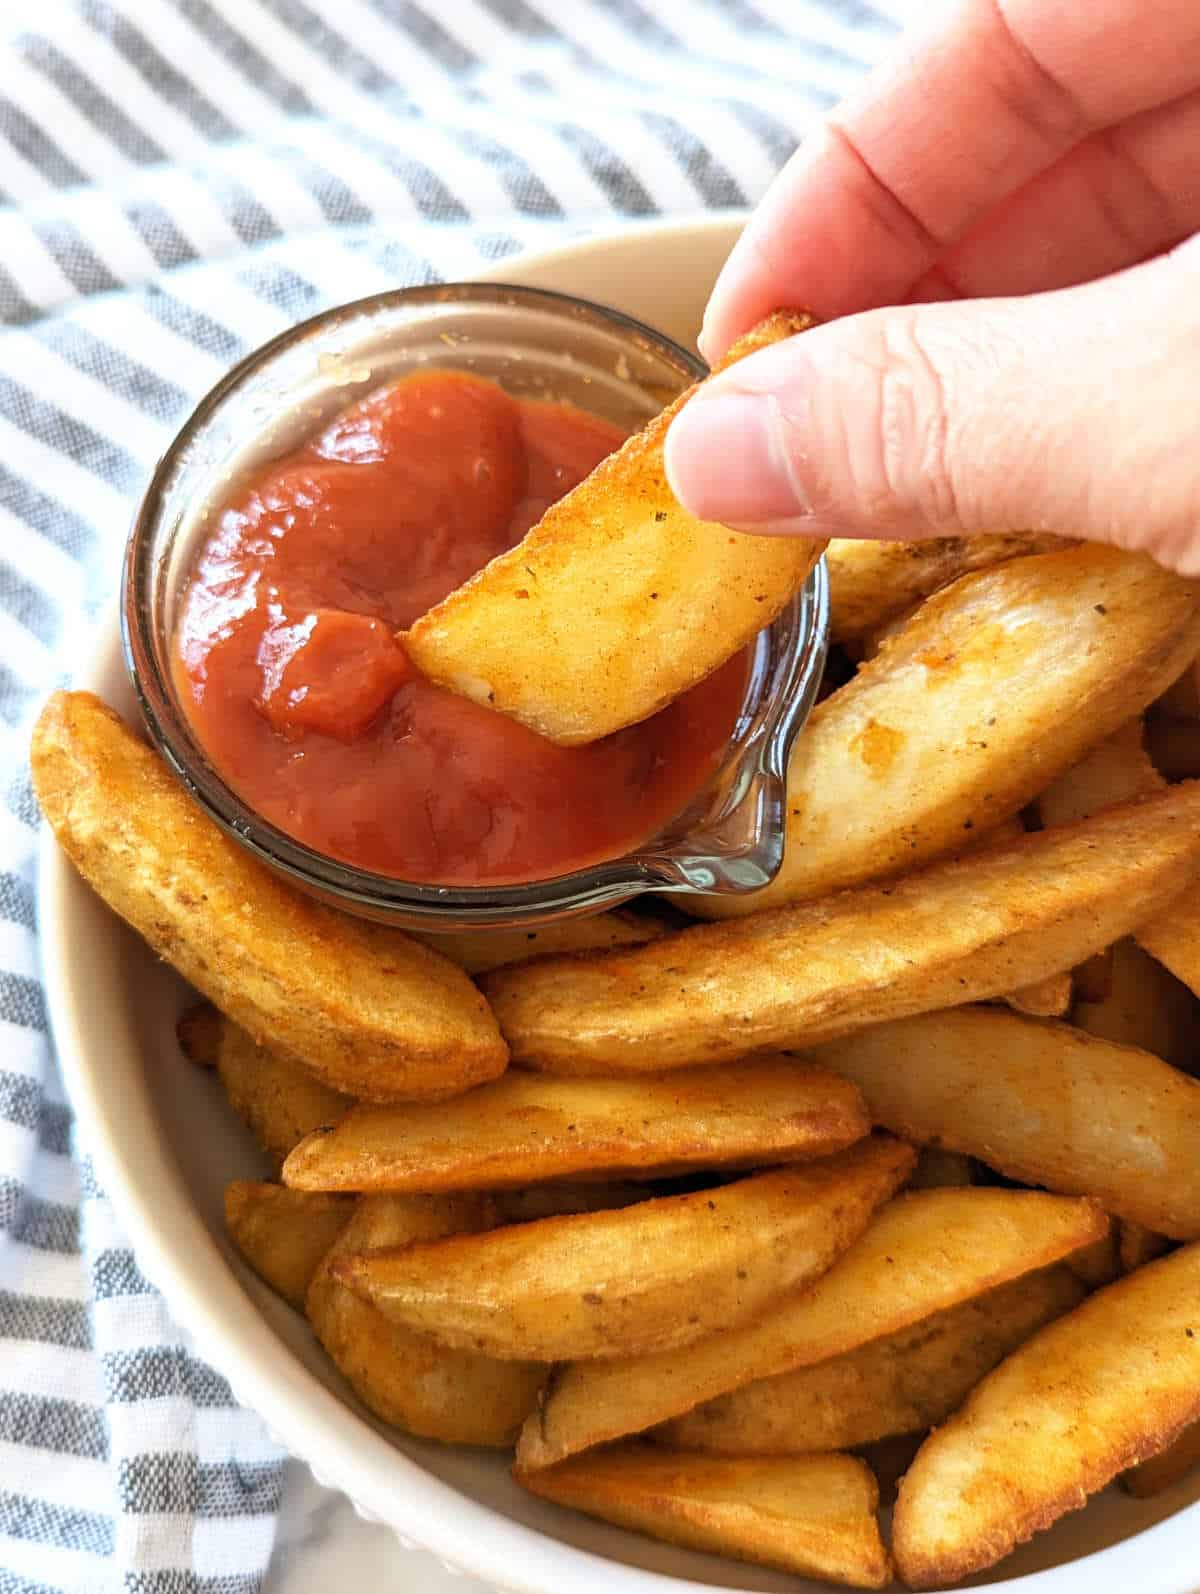 Hand dipping a potato wedge into a small bowl of ketchup.